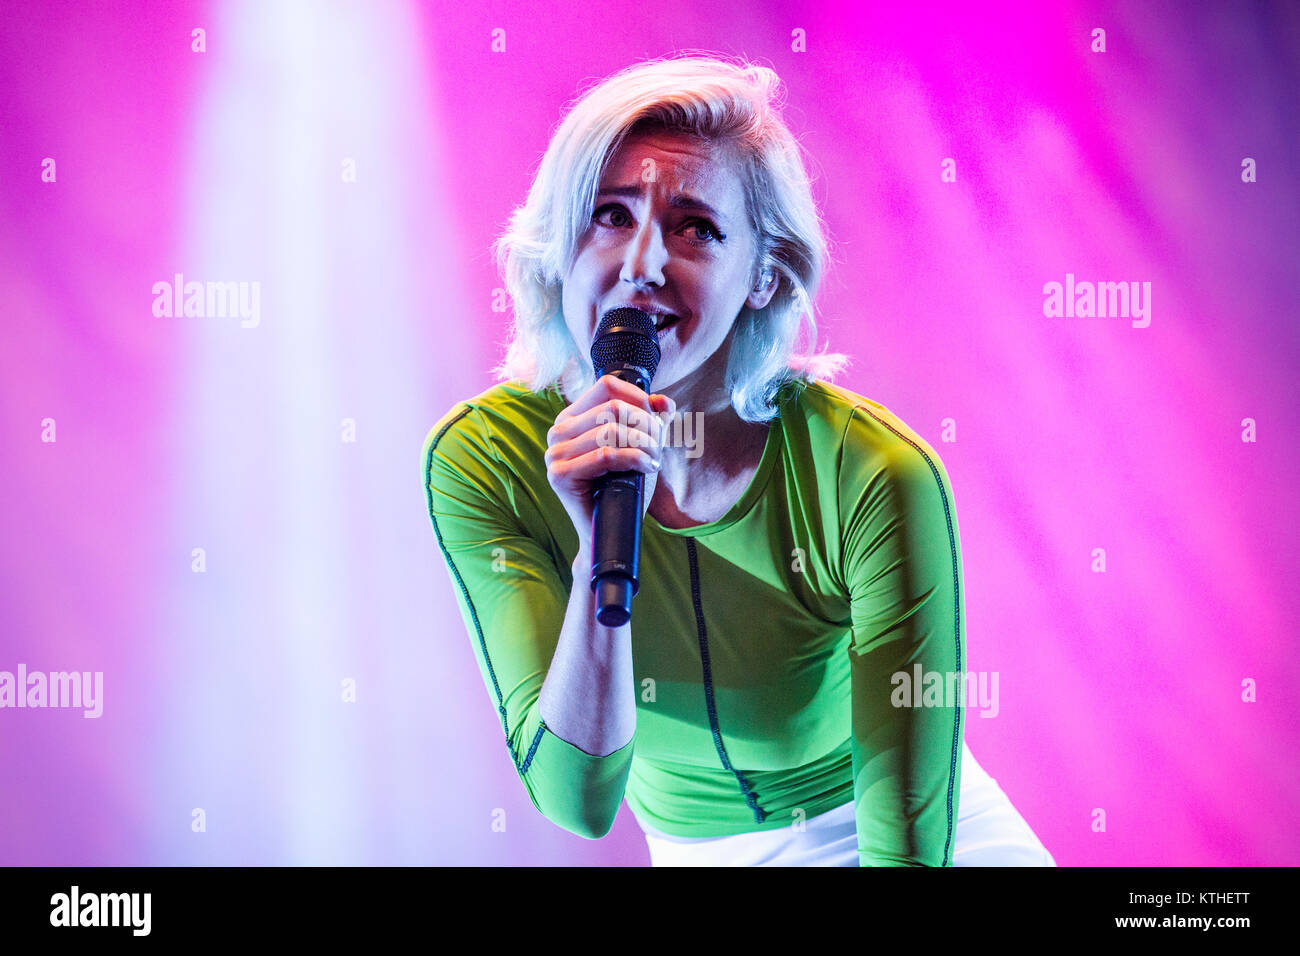 The Swedish pop singer, musician and songwriter Veronica Maggio performs a live concert at the Swedish music festival Bråvalla Festival 2016. Sweden, 02/07 2016. Stock Photo